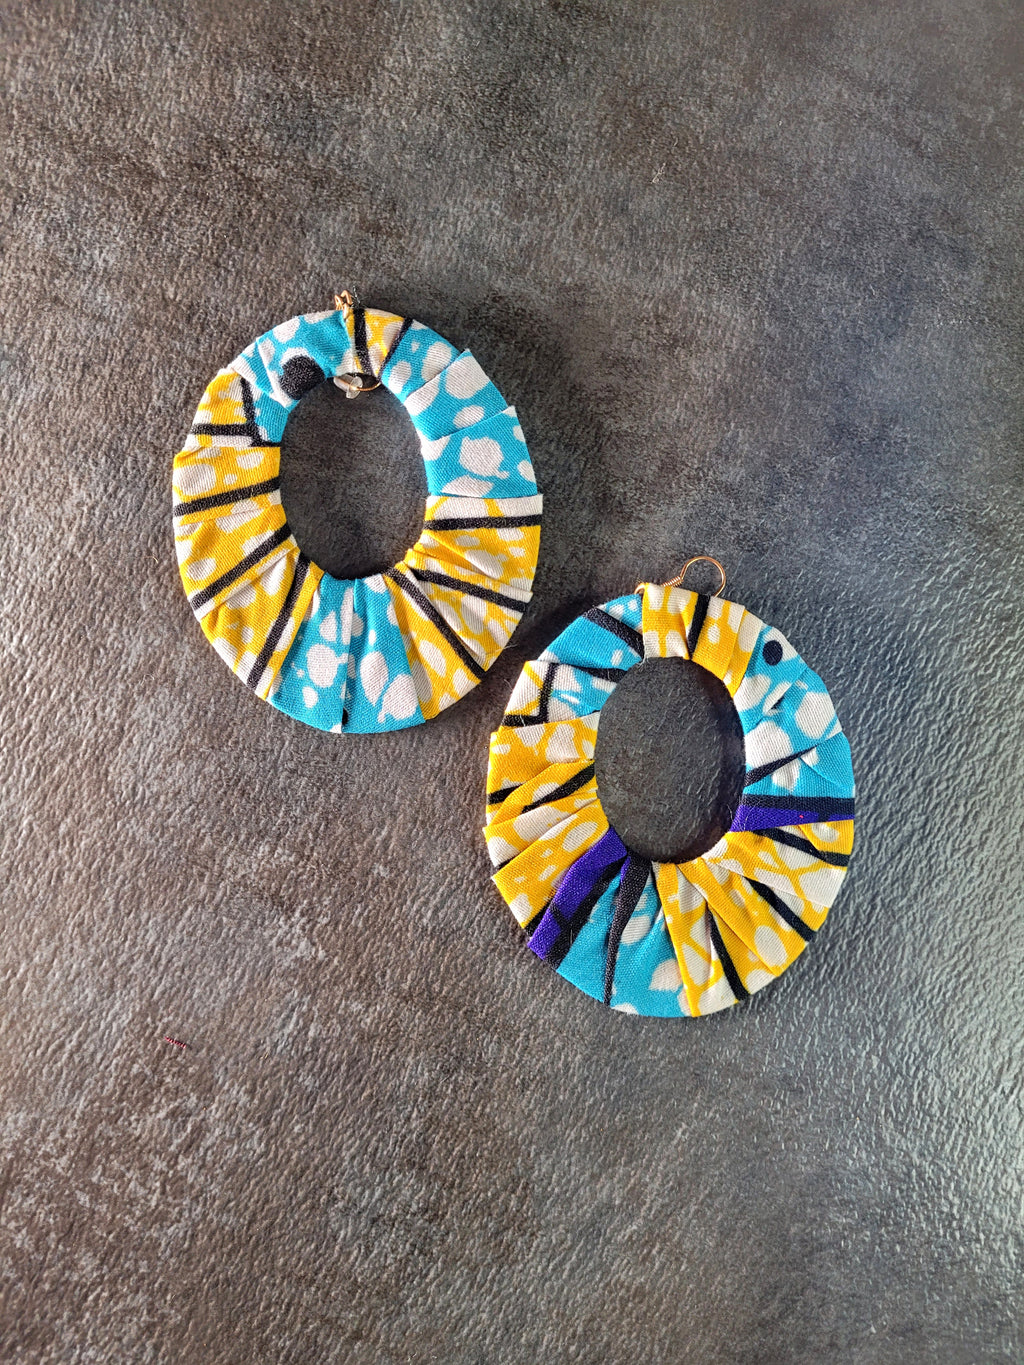 African Cloth Oval Earrings - Baby Blue, Yellow, White